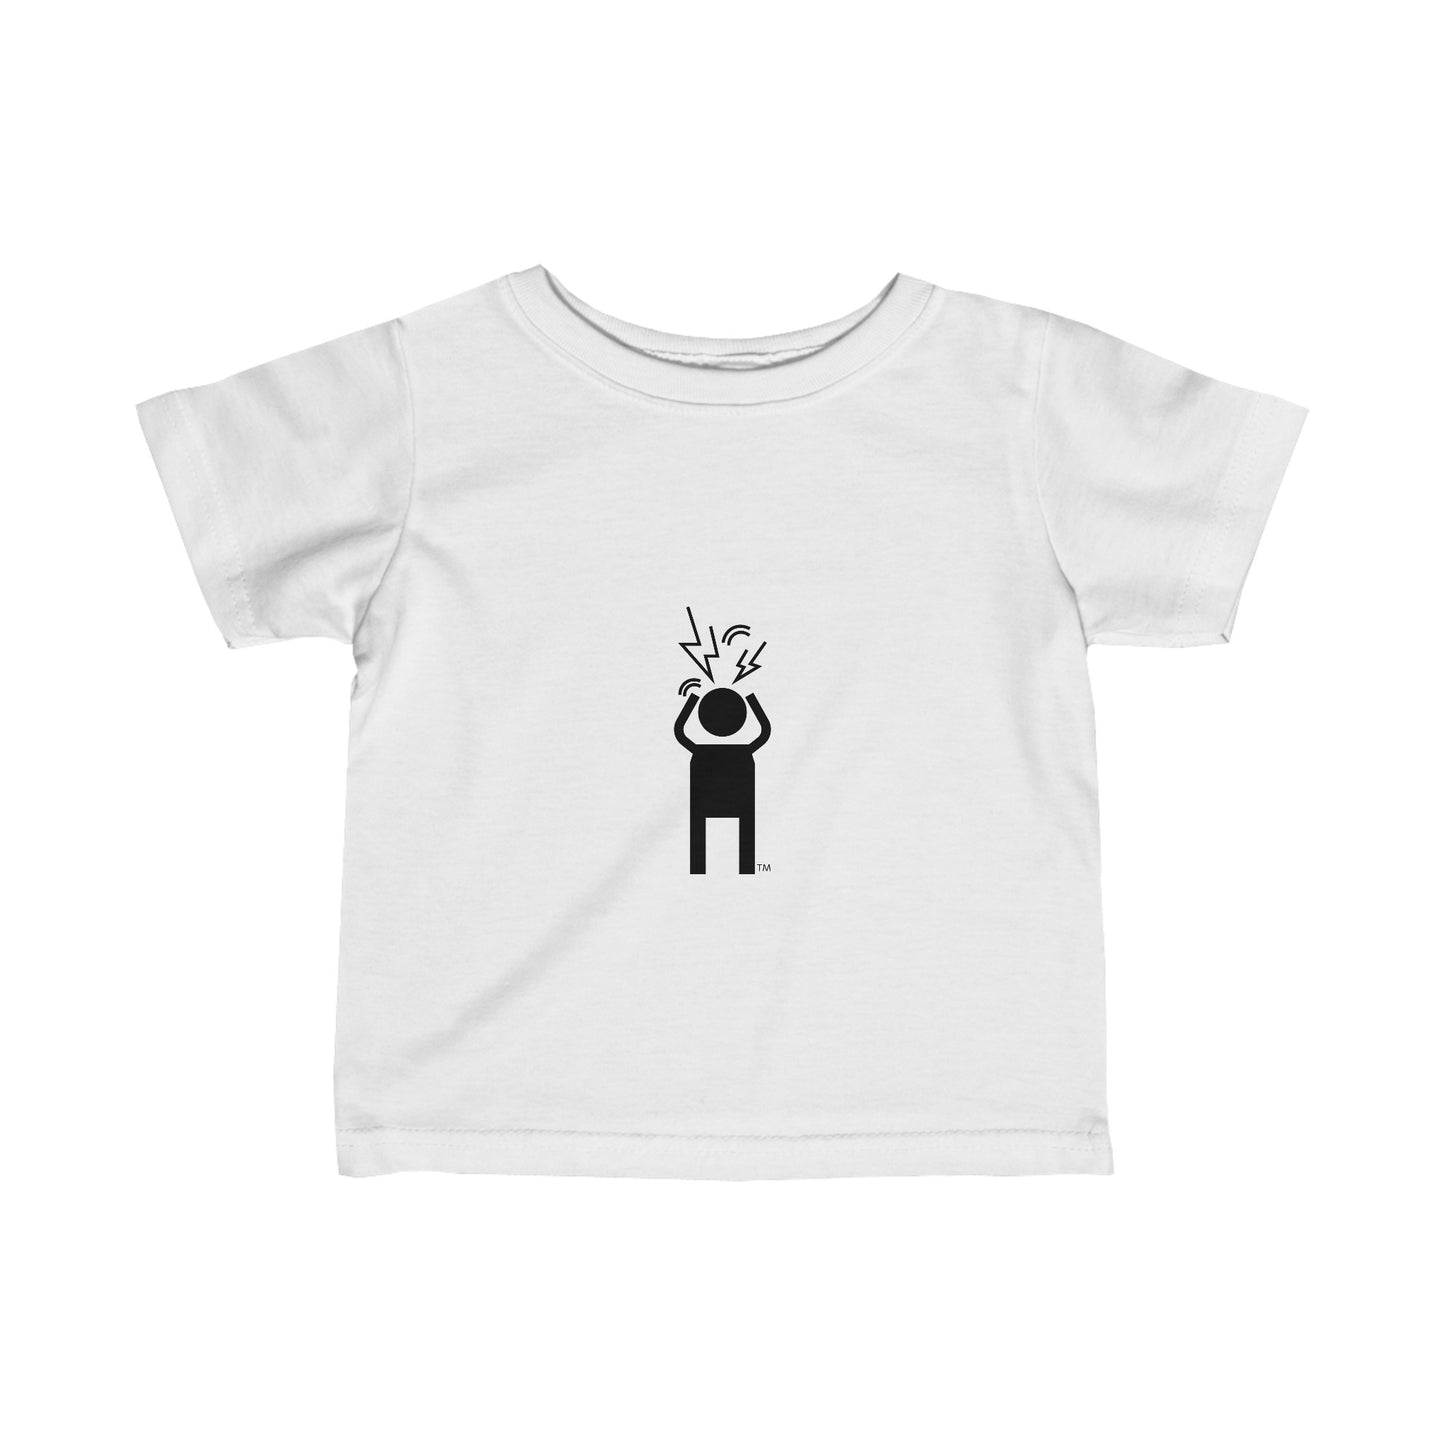 Screaming Person Infant Jersey Tee